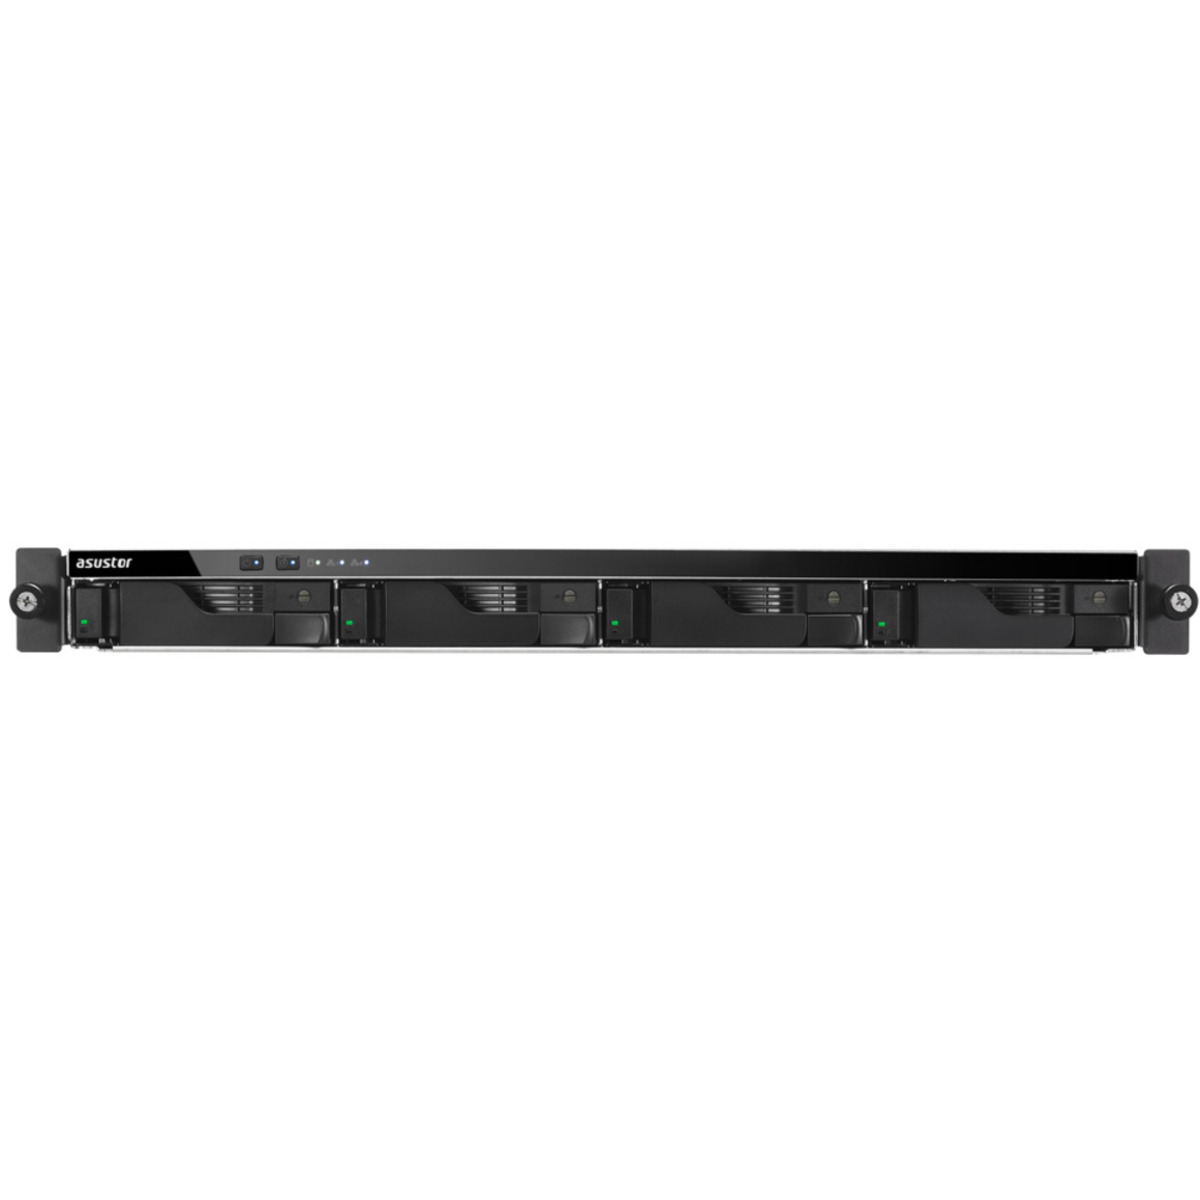 buy $1544 ASUSTOR LOCKERSTOR 4RD AS6504RD 16tb RackMount NAS - Network Attached Storage Device 4x4000gb Toshiba MN Series MN08ADA400E 3.5 7200rpm SATA 6Gb/s HDD NAS Class Drives Installed - Burn-In Tested - ON SALE - FREE RAM UPGRADE - nas headquarters buy network attached storage server device das new raid-5 free shipping simply usa LOCKERSTOR 4RD AS6504RD